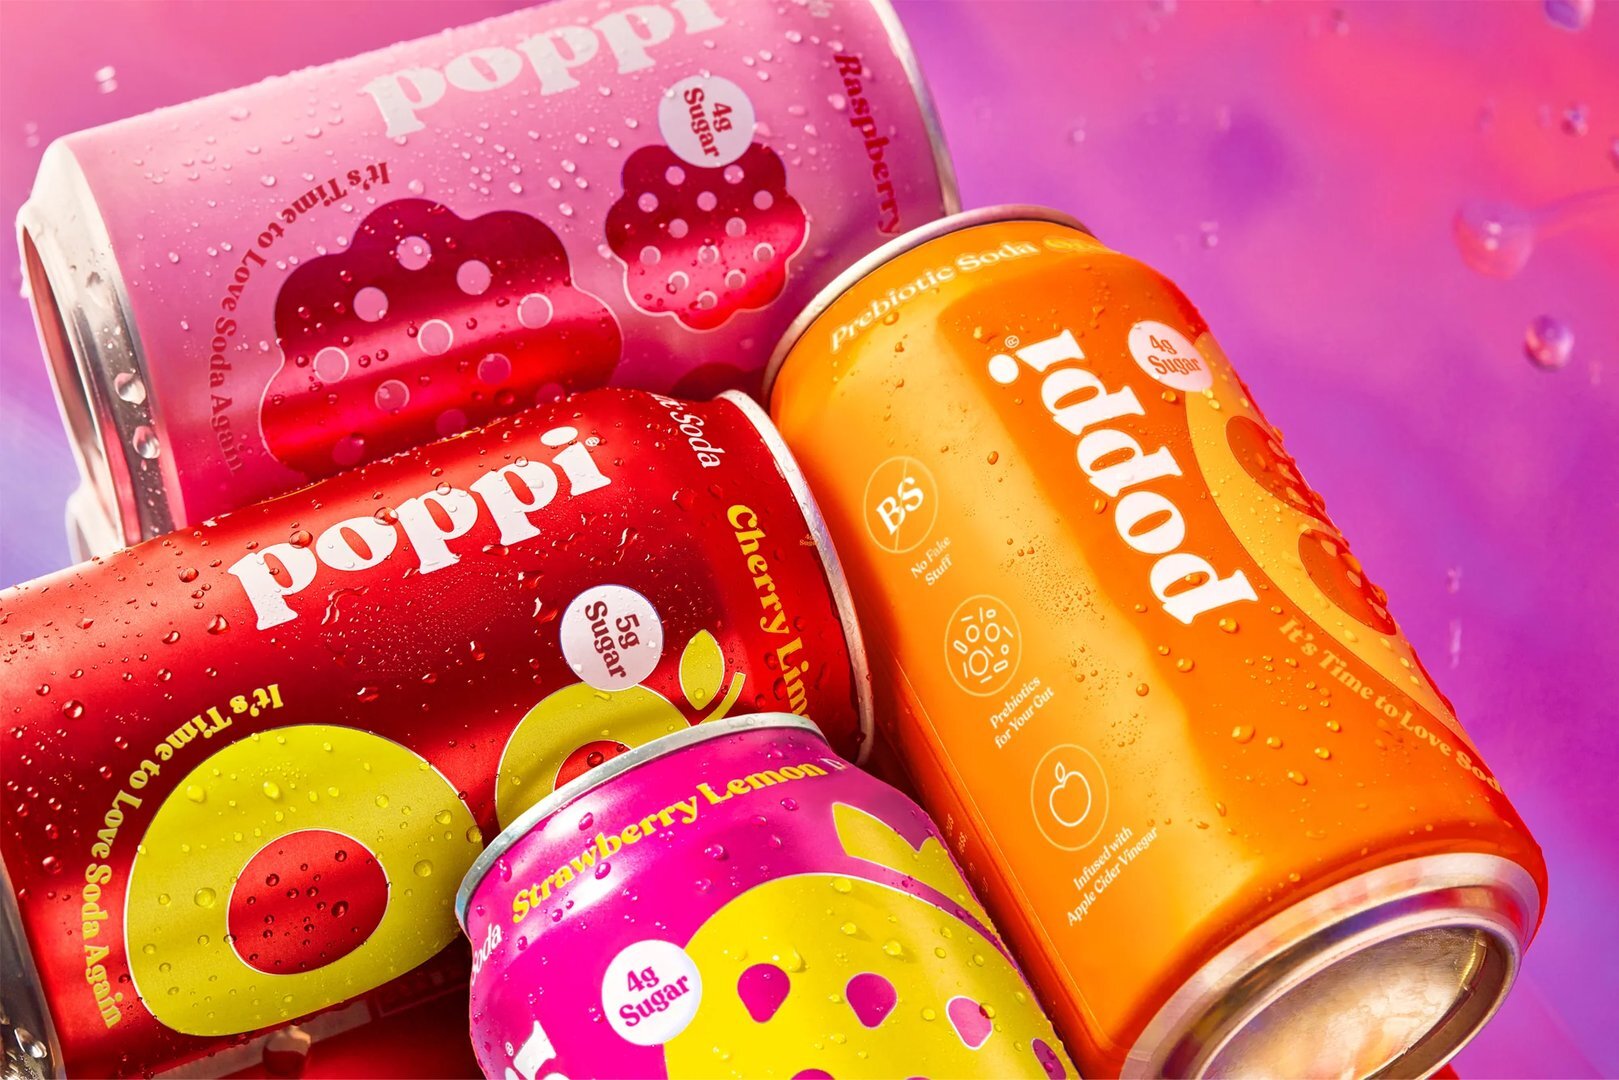 Poppi Drink Lawsuit Escalates: How the Popular Soda Alternative Faces Legal Heat Over Health Claims